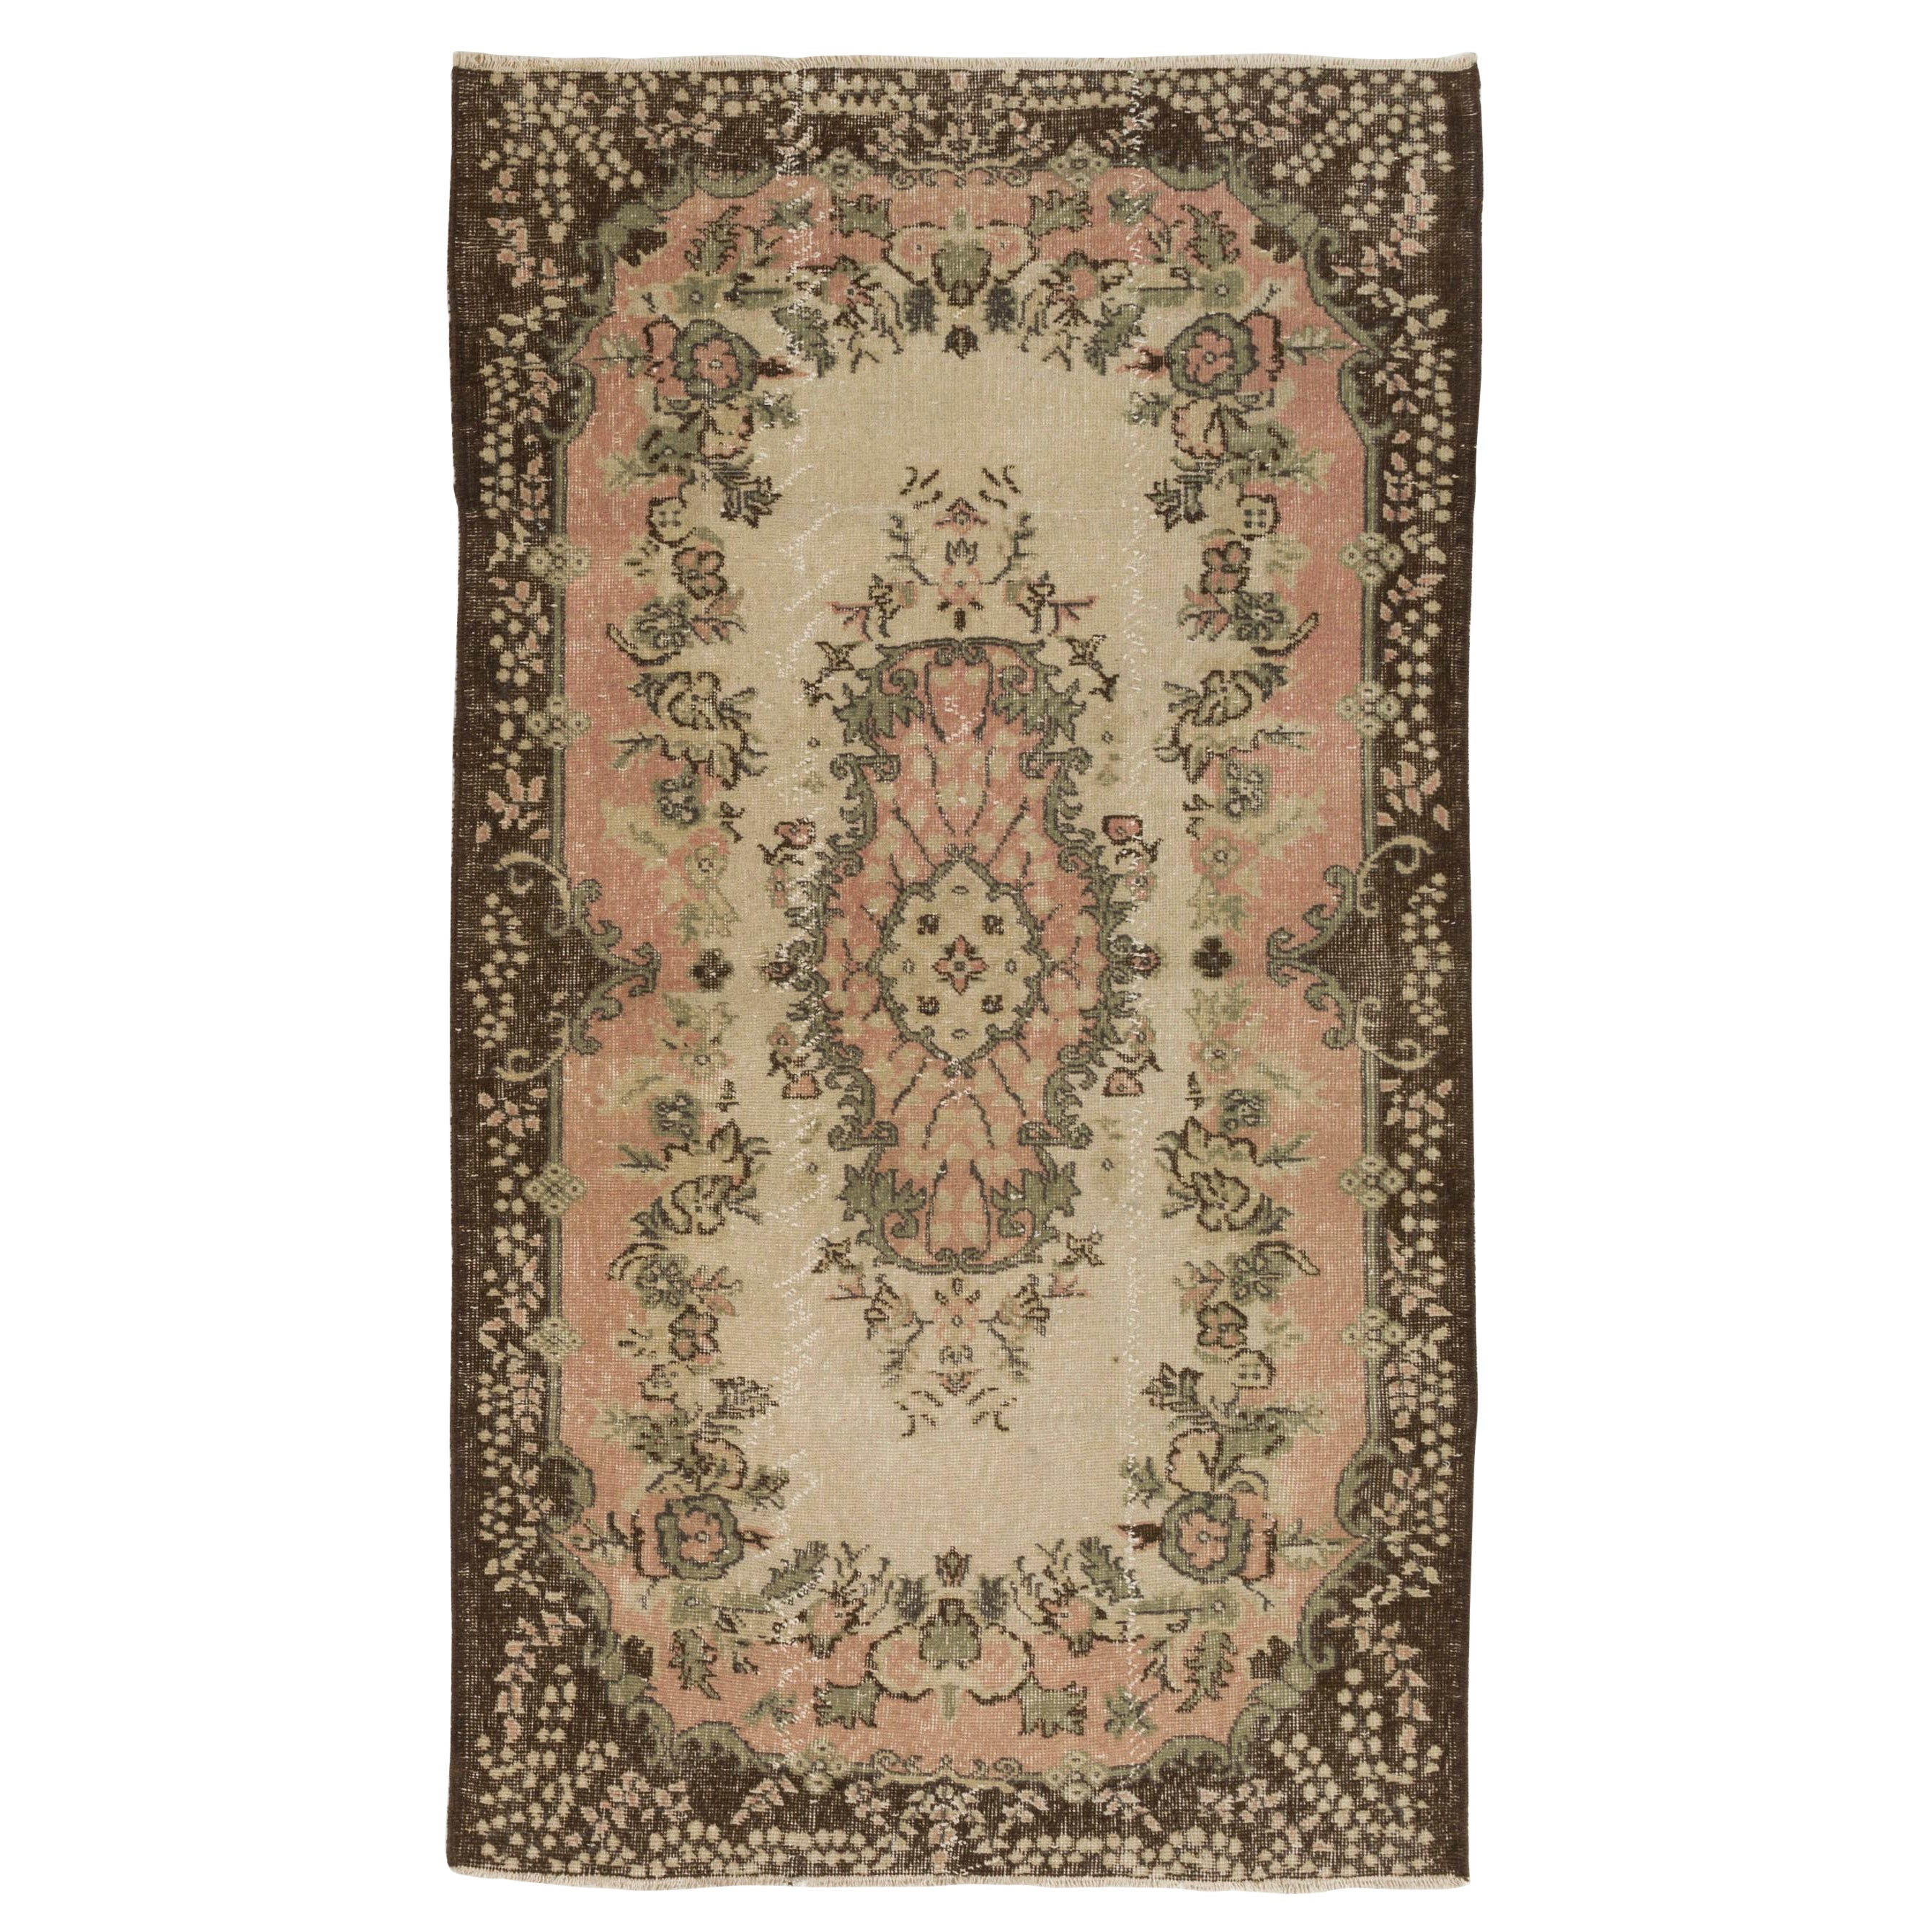 4x7.2 Ft Vintage Hand-Knotted Turkish Rug in Beige, Green, Pink & Brown Colors For Sale